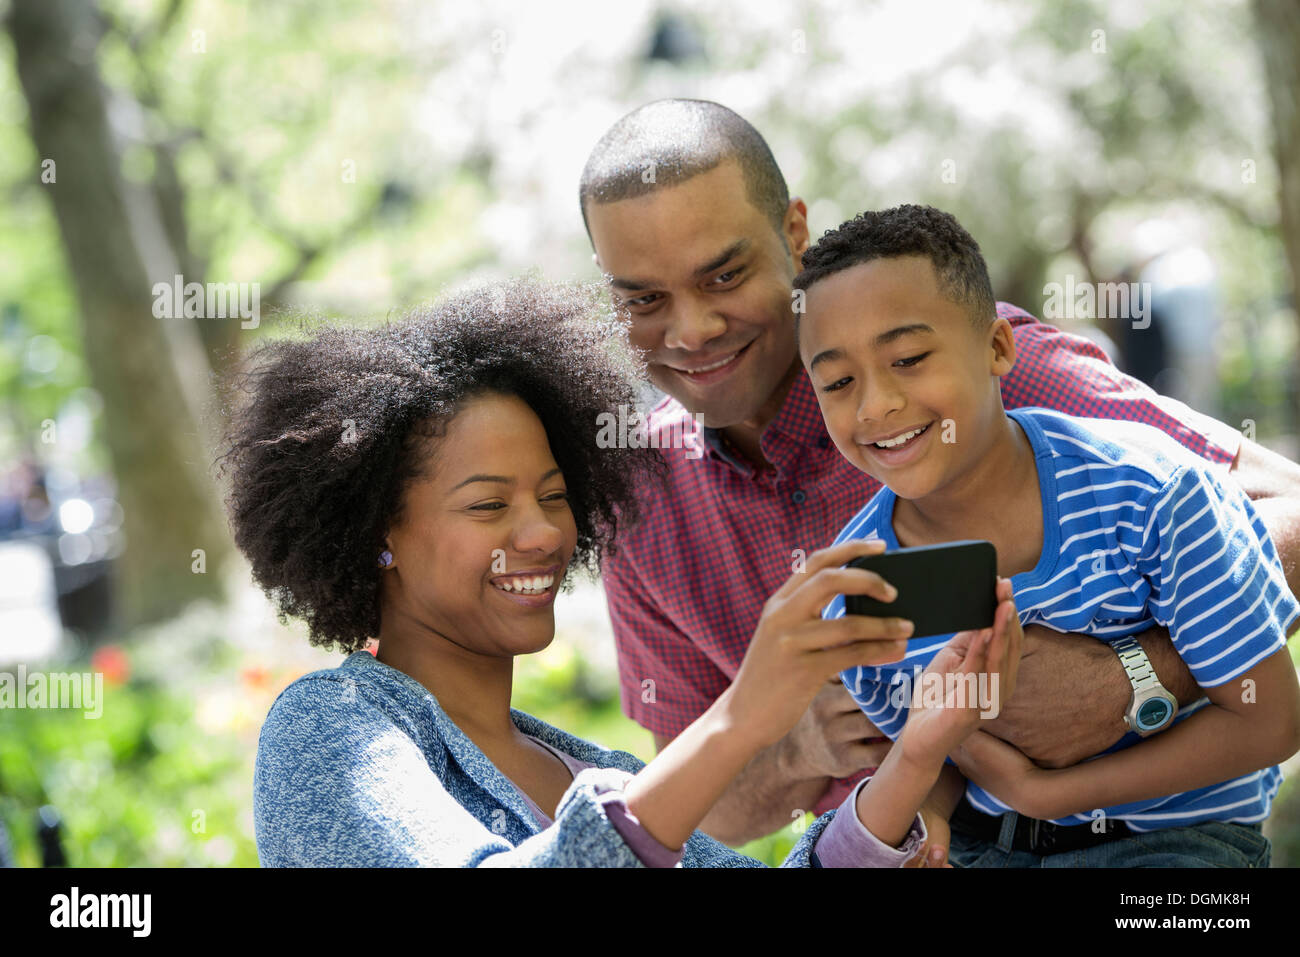 A family in the park on a sunny day. Taking photographs with a smart phone. Stock Photo